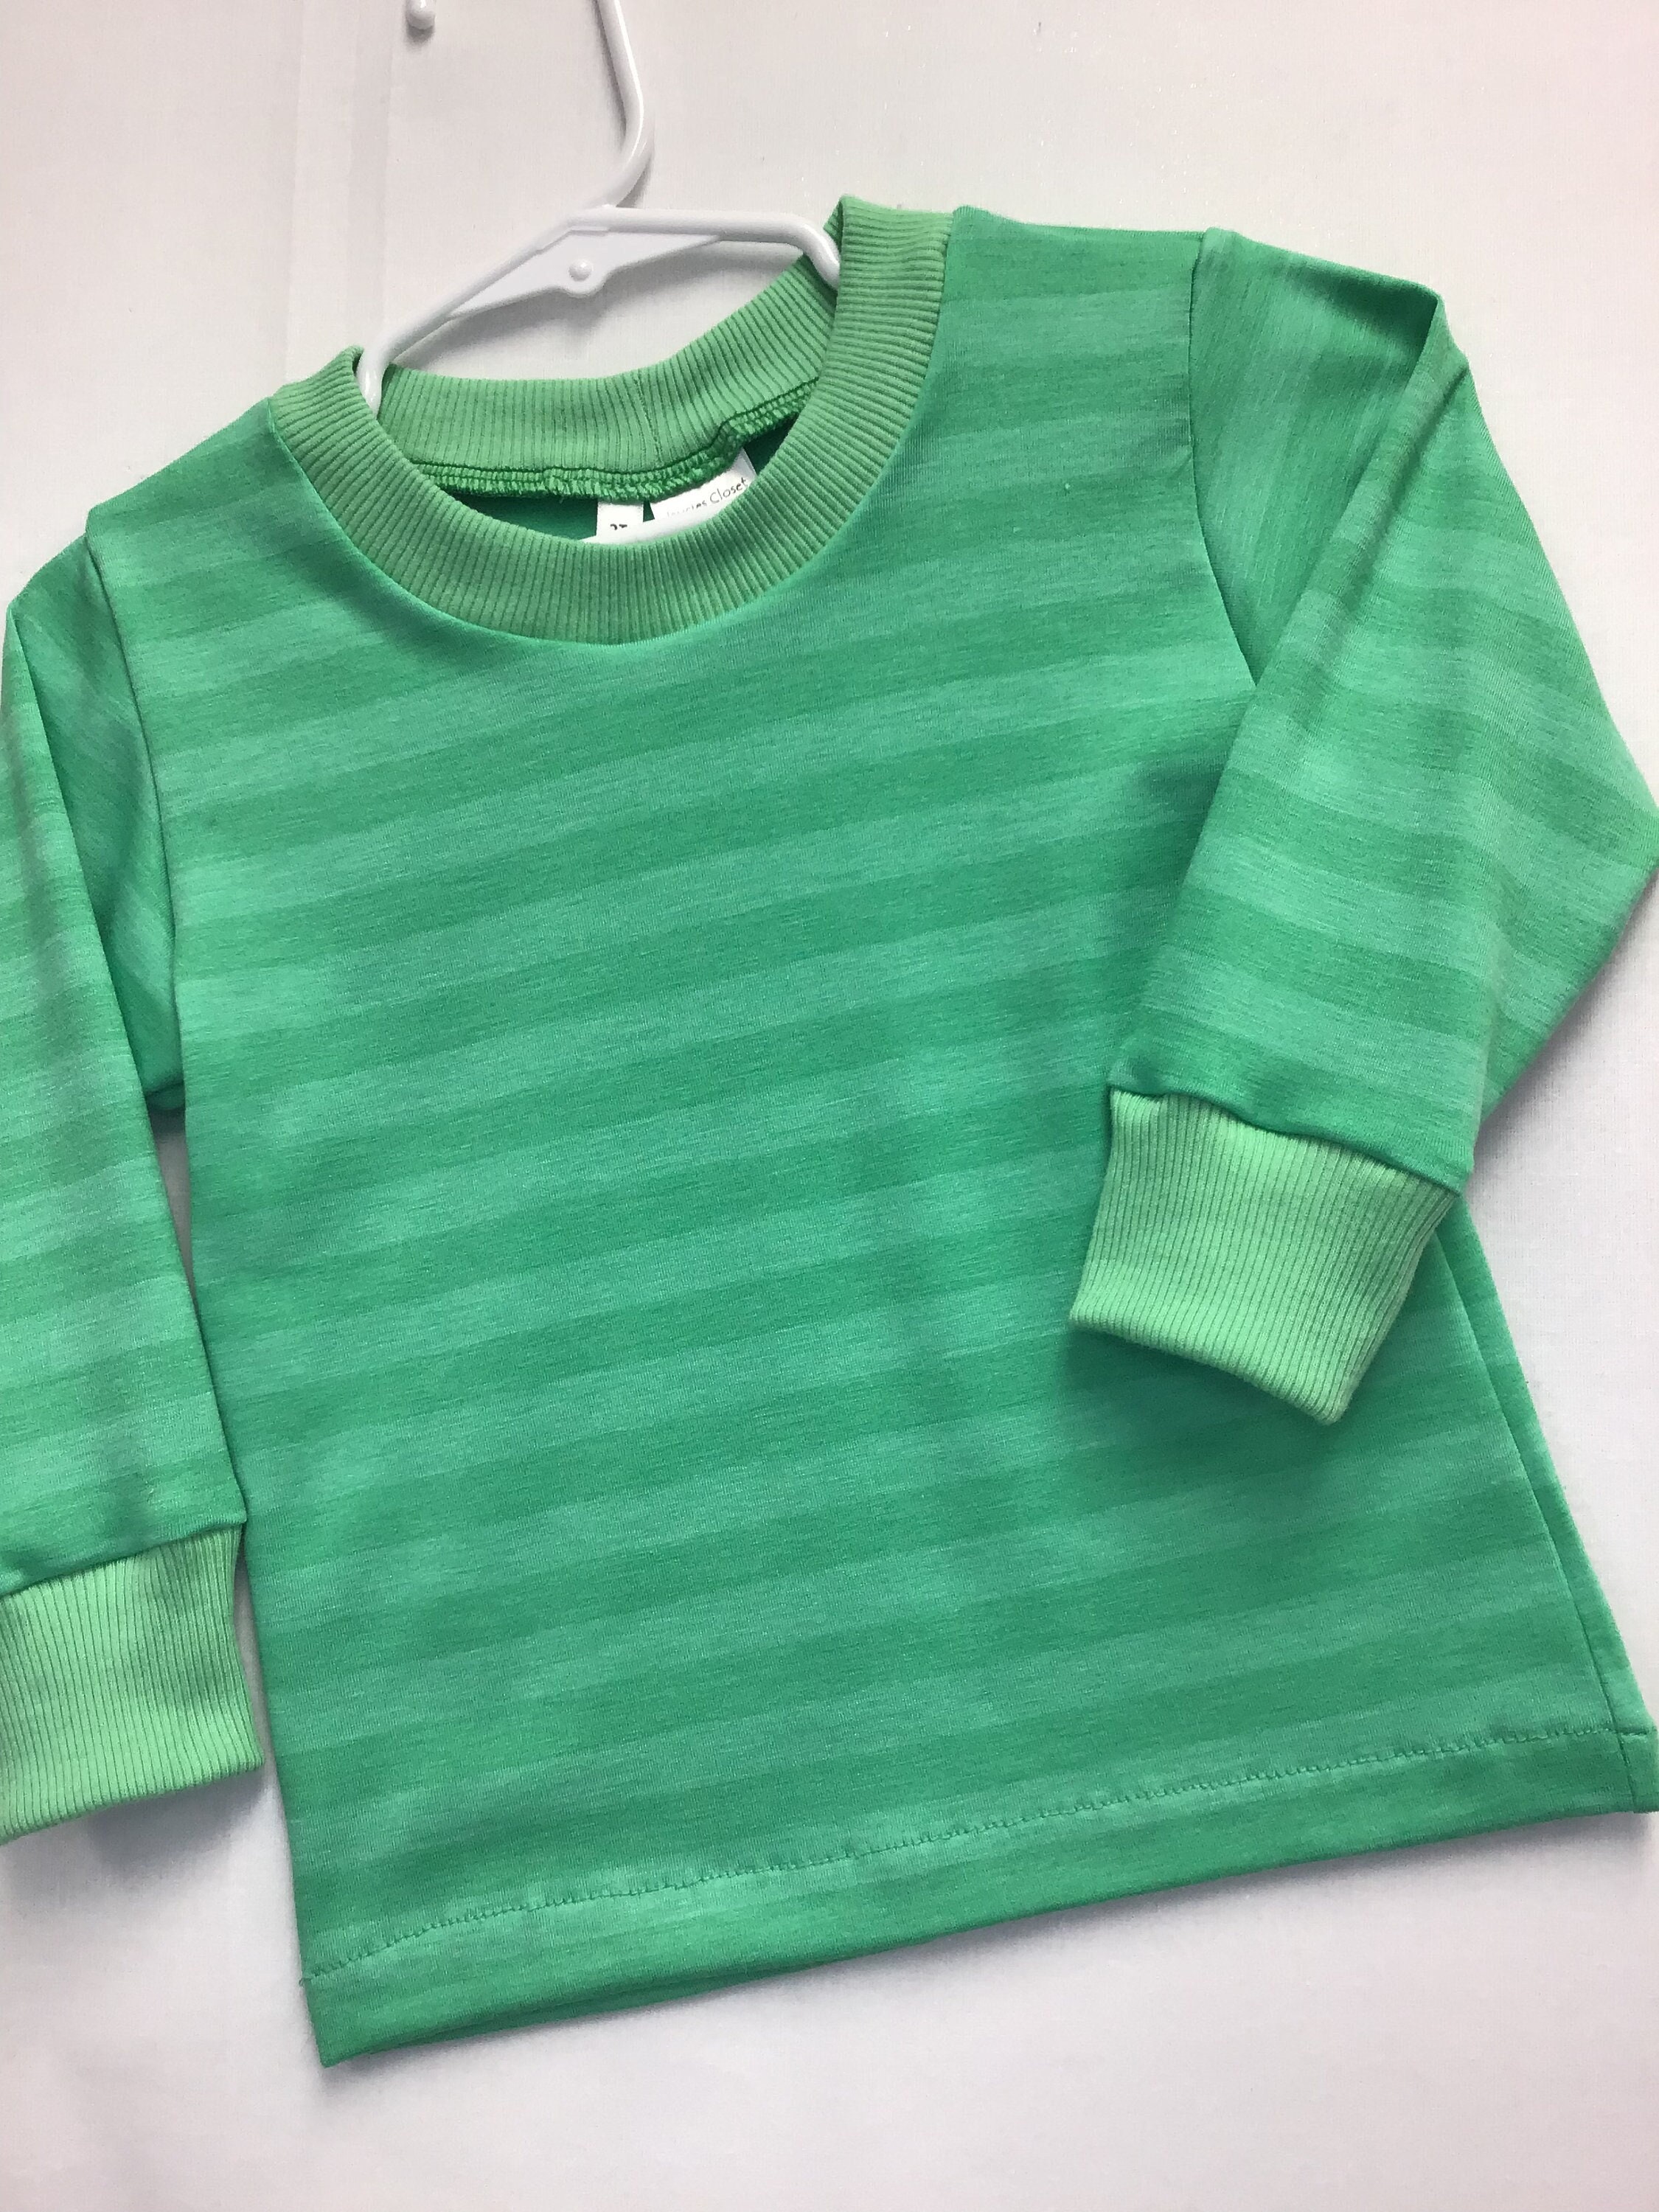 Two Tone Striped T-shirt, Green, Baby and Etsy Toddler 